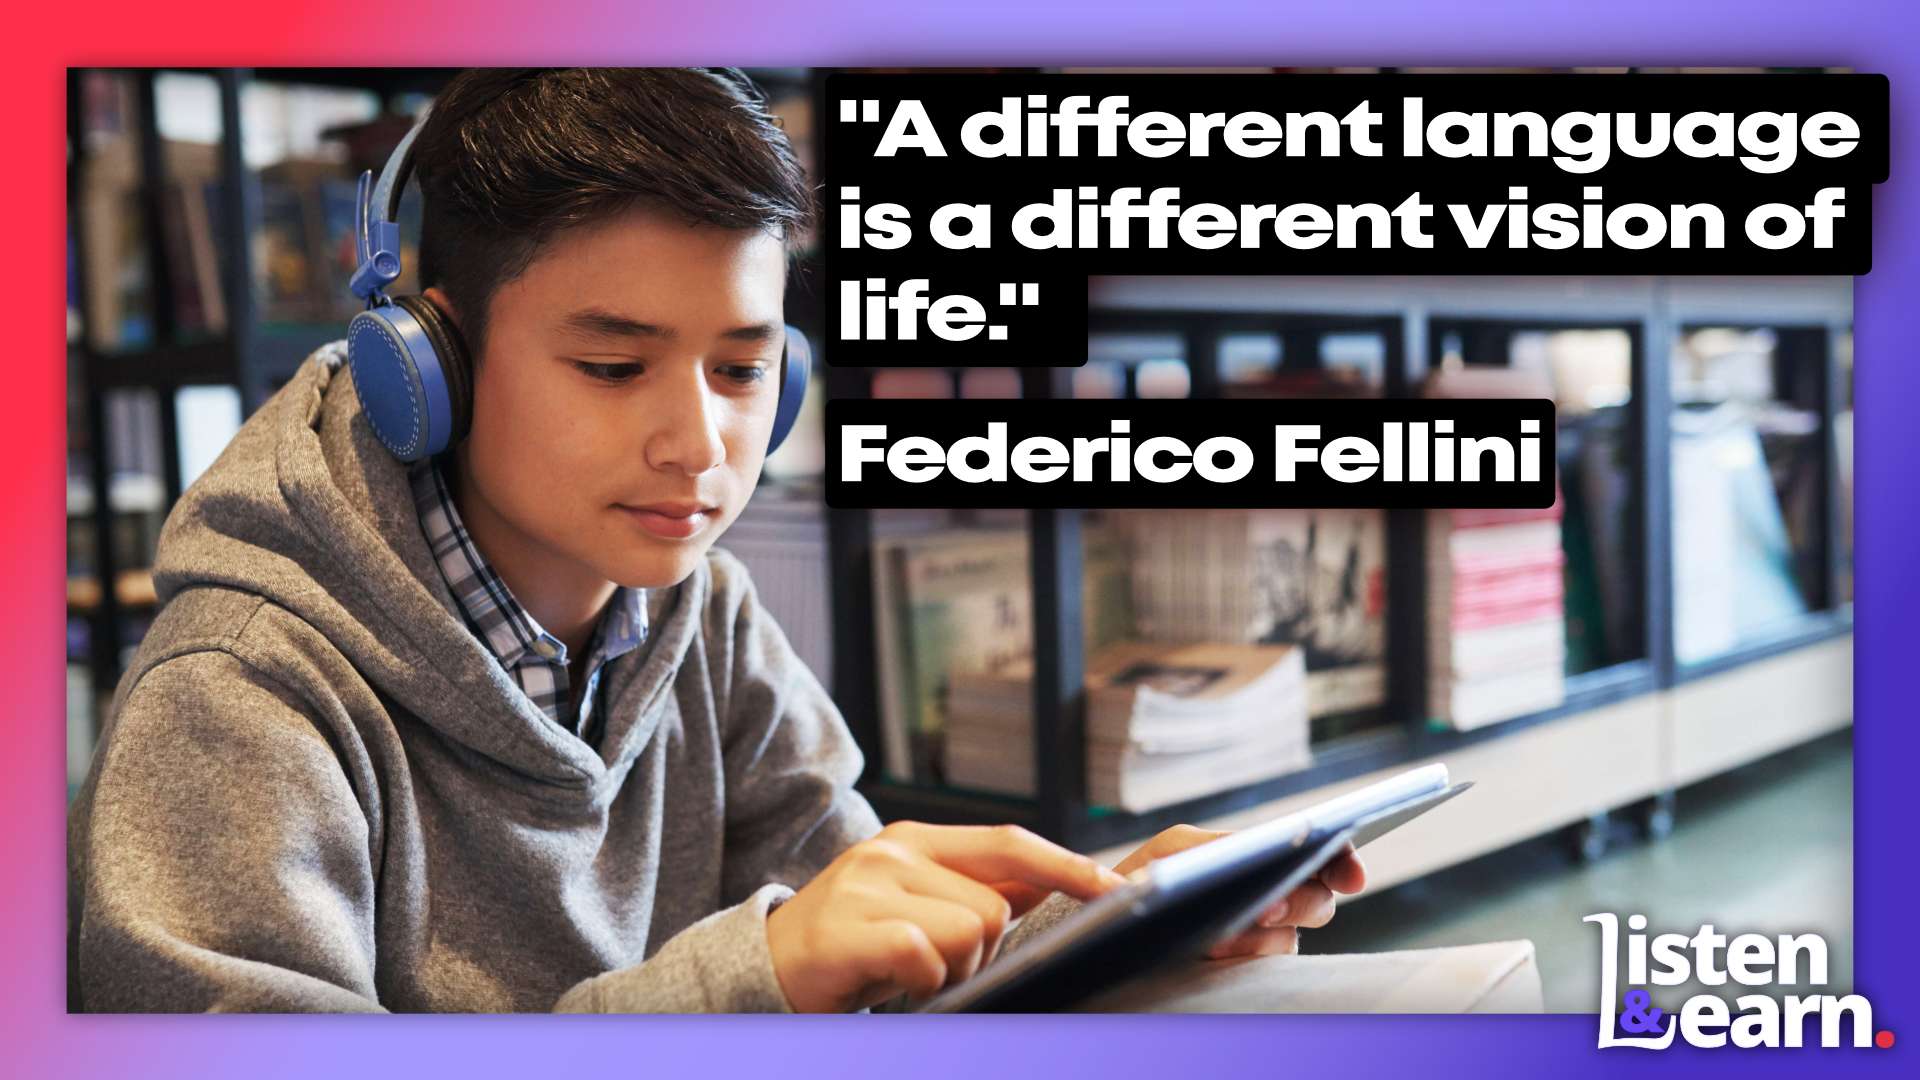 A young man learning a new language. Break language barriers, improve spoken English fluency today. Join thousands of learners benefiting from our podcast - subscribe now!